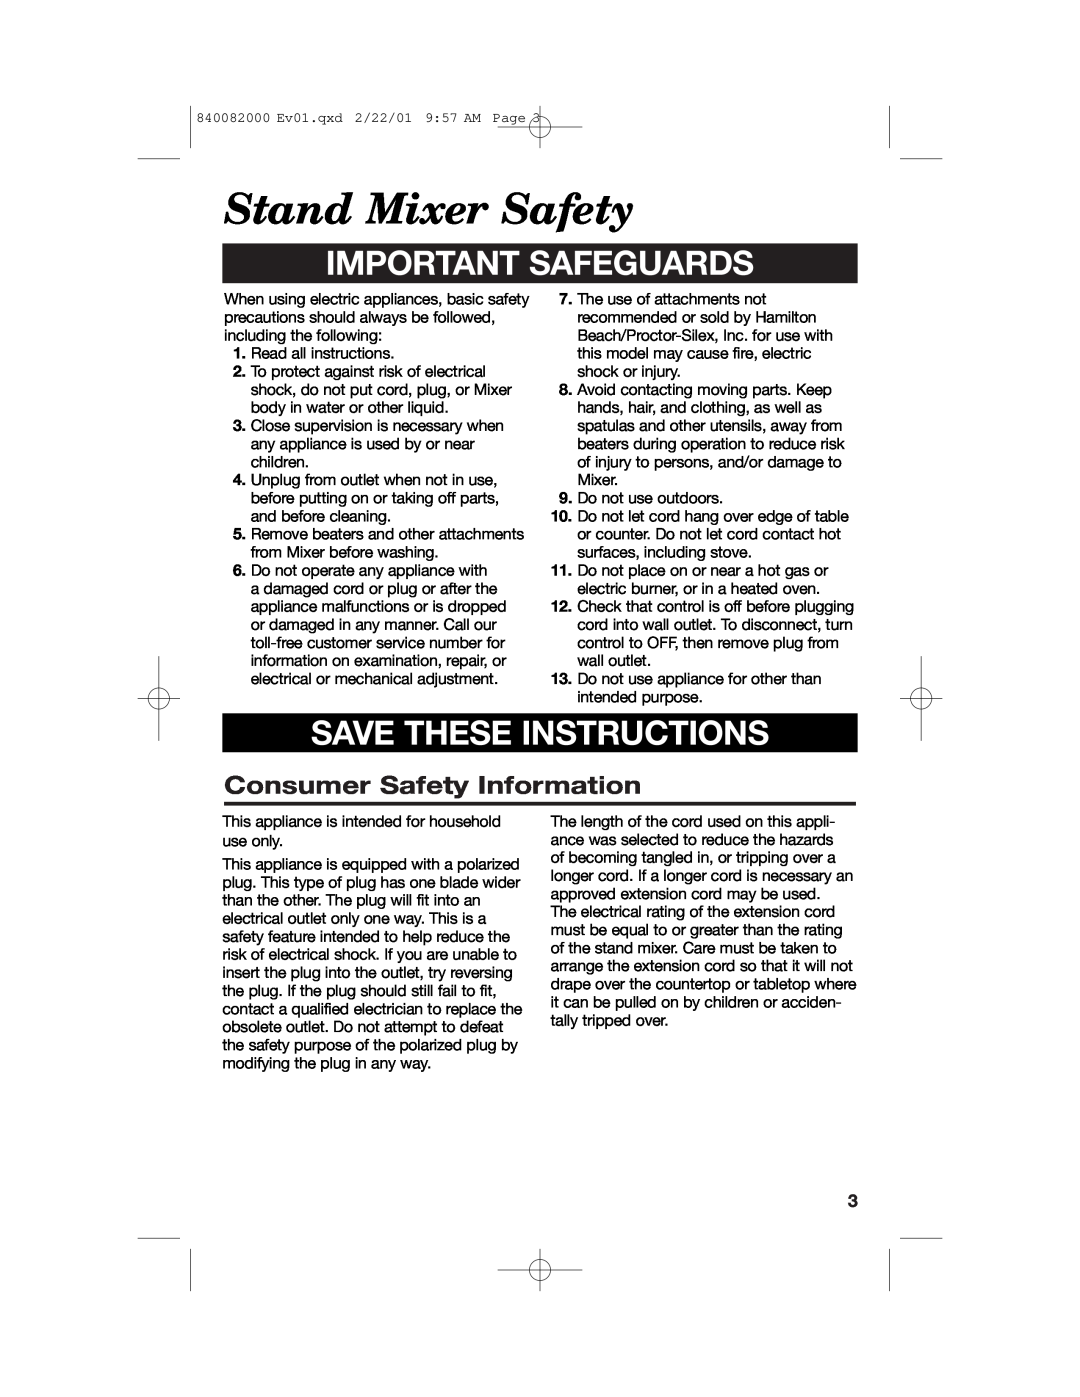 Hamilton Beach 60695 manual Stand Mixer Safety, Consumer Safety Information, Important Safeguards, Save These Instructions 